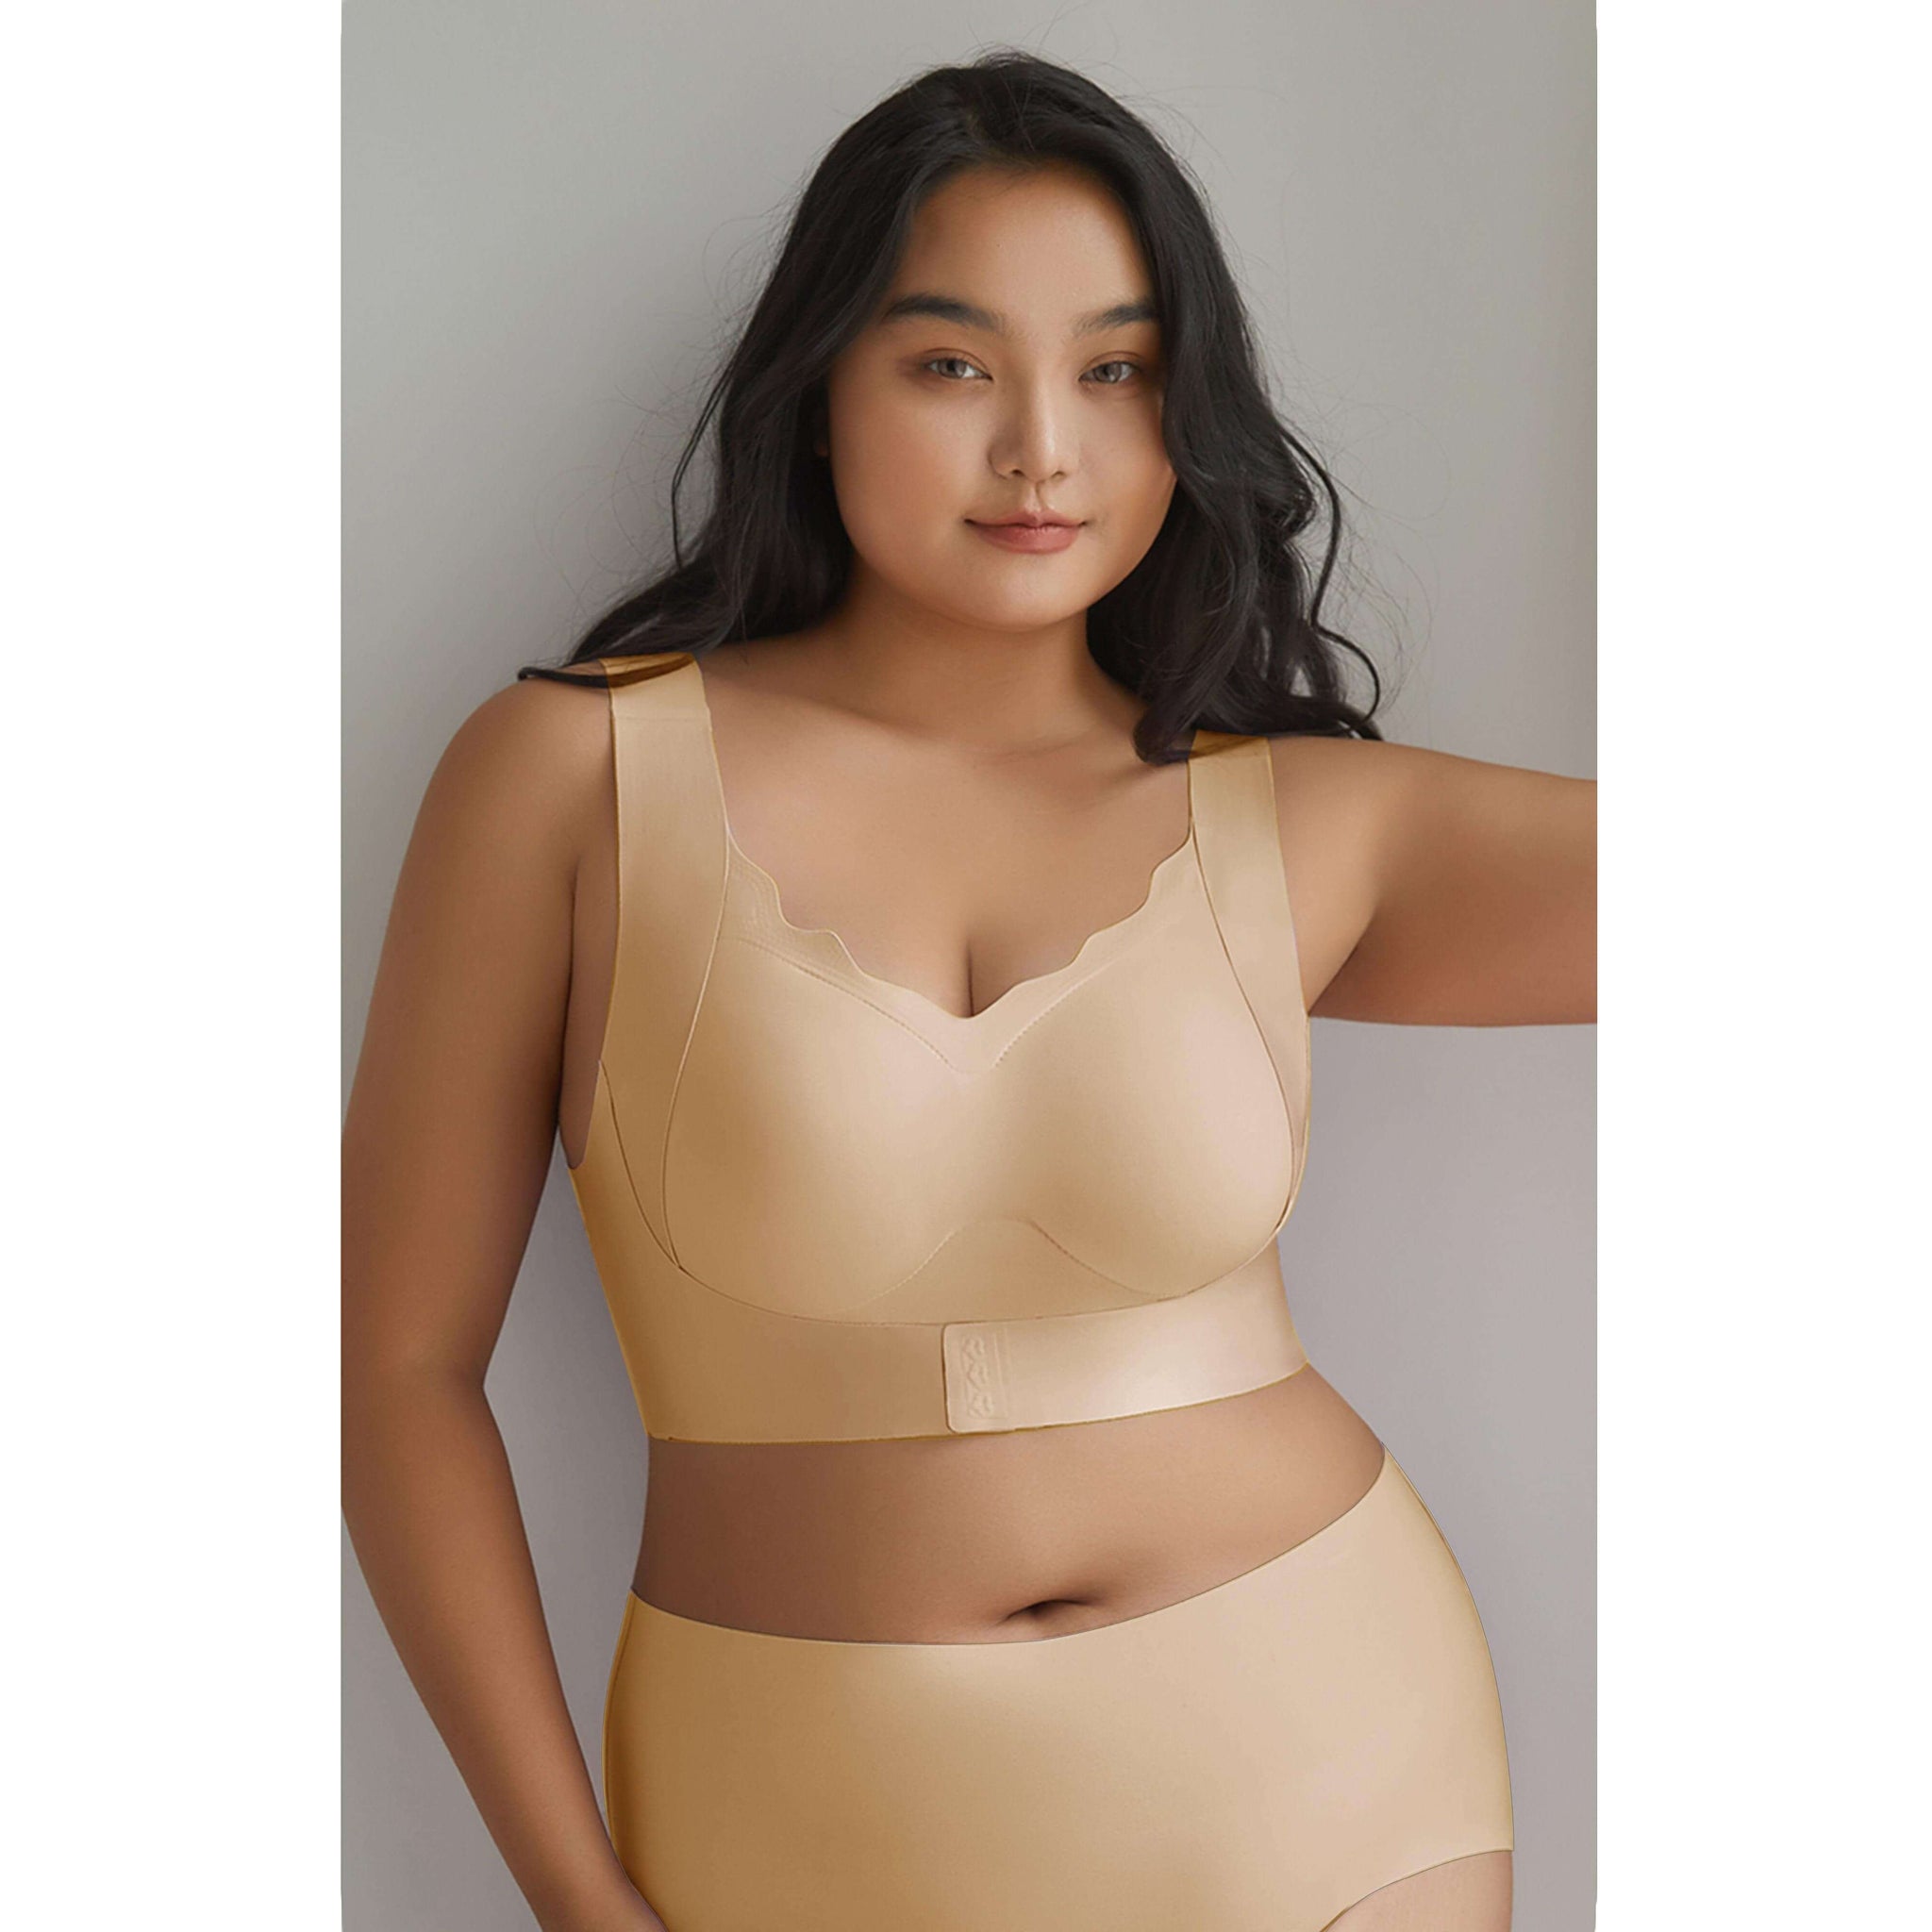 Comfy plus-size bra for women with anti-sagging plus-size breasts